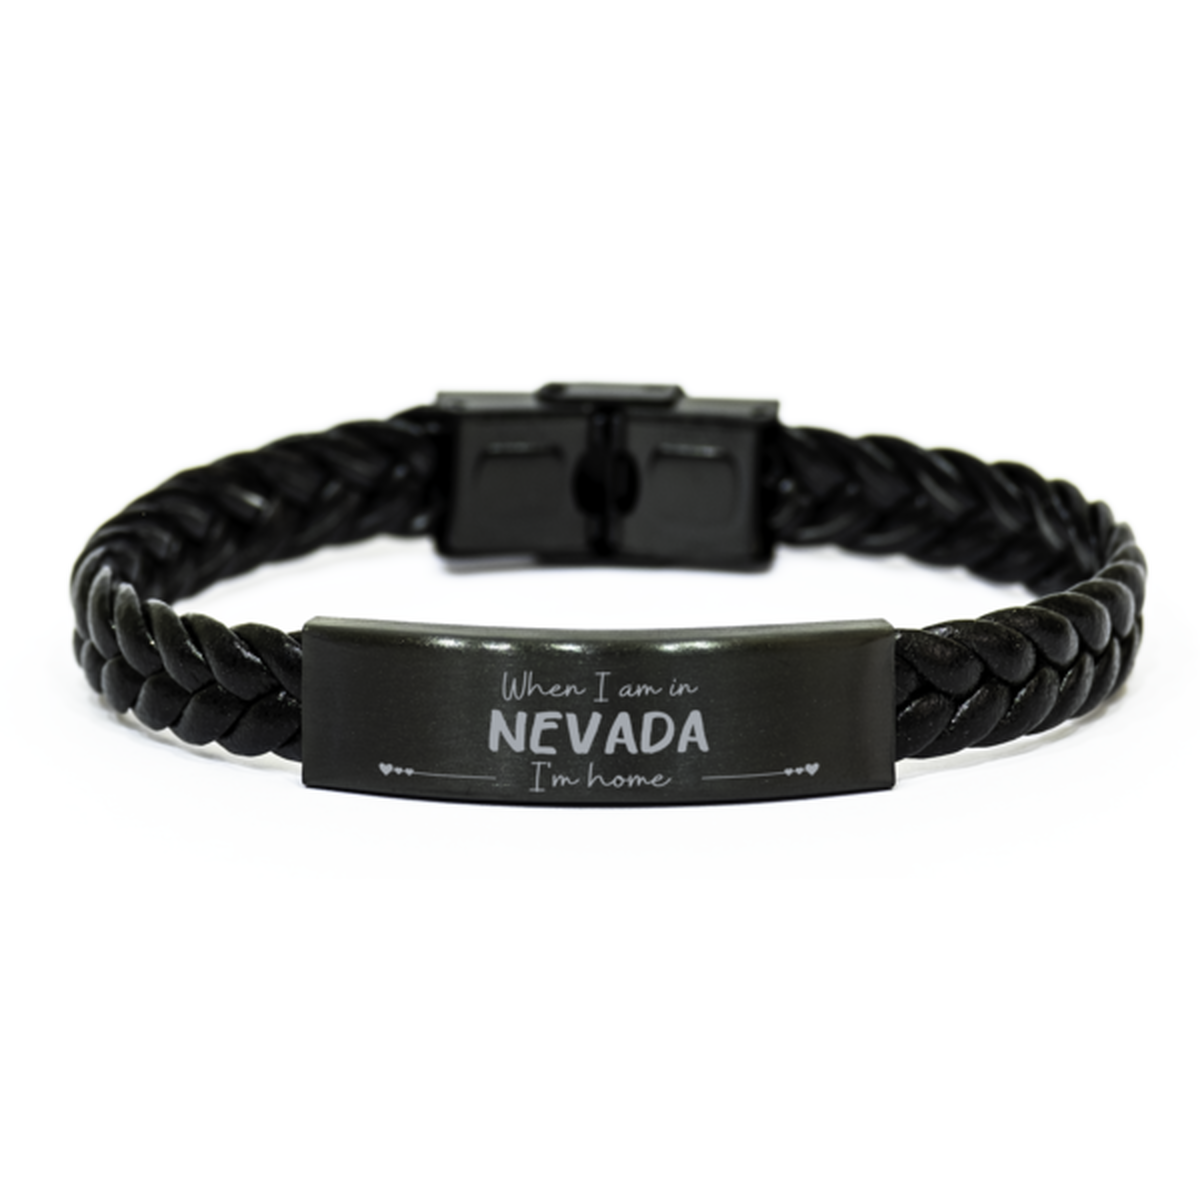 When I am in Nevada I'm home Braided Leather Bracelet, Cheap Gifts For Nevada, State Nevada Birthday Gifts for Friends Coworker